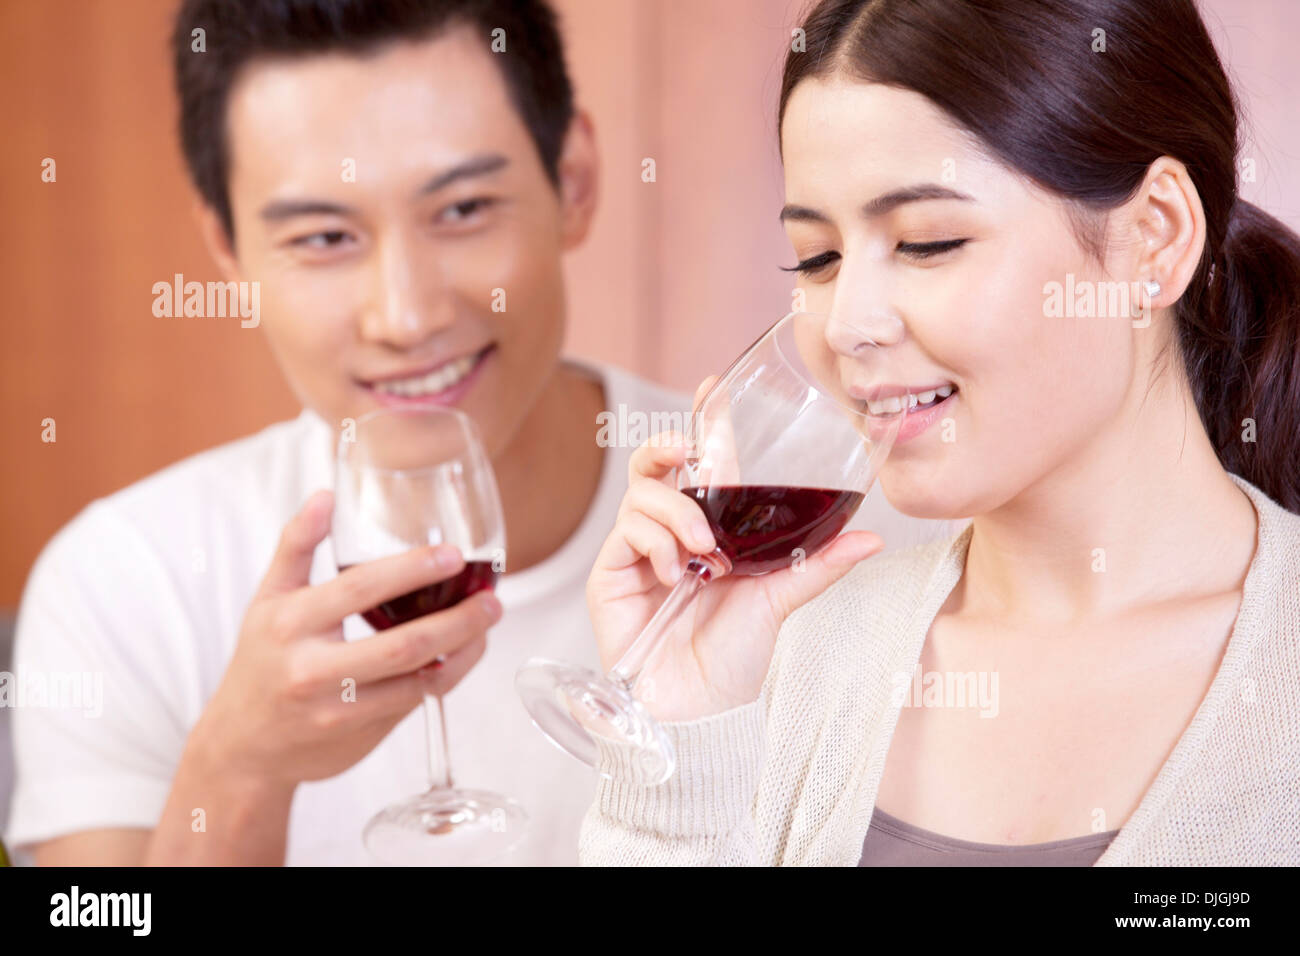 Eastern Couple, Lovers Stock Photo